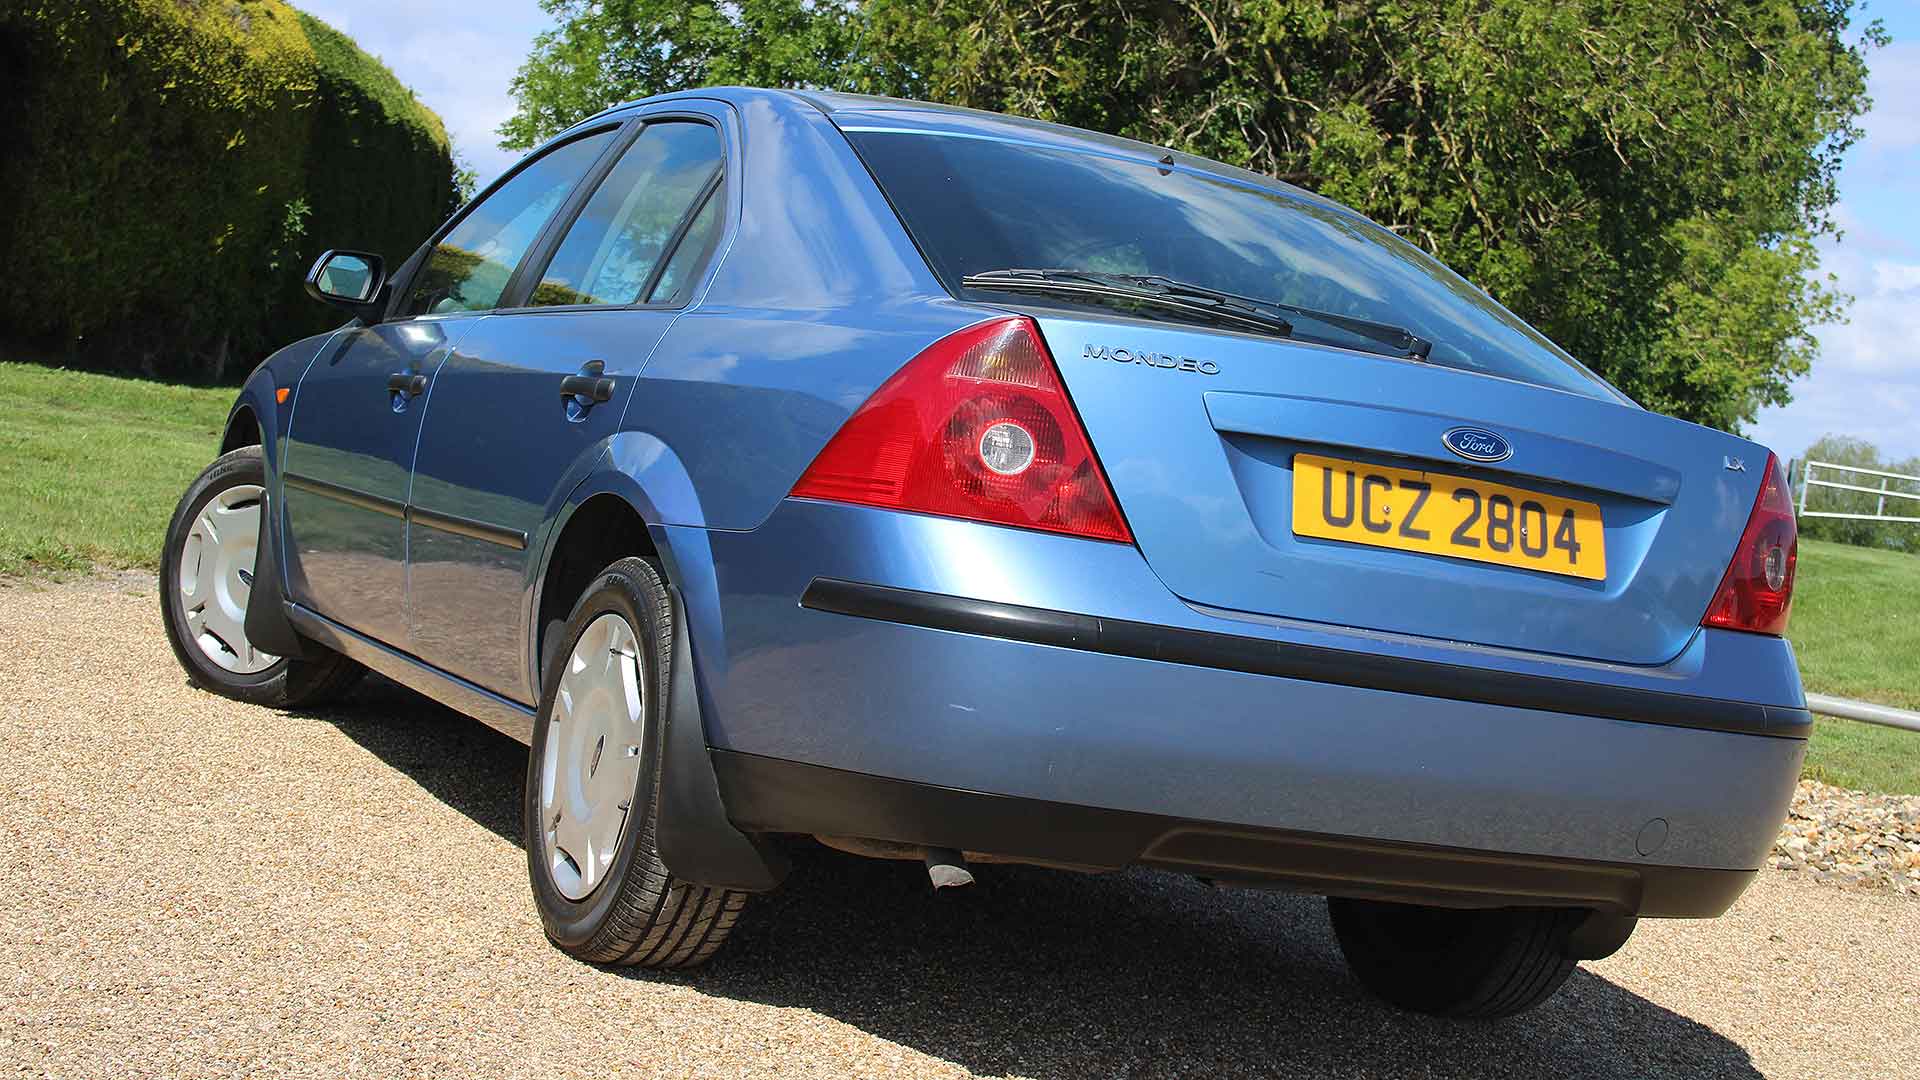 Ford Mondeo over the years (Mk.1 - Mk.5) Does it keep getting better?